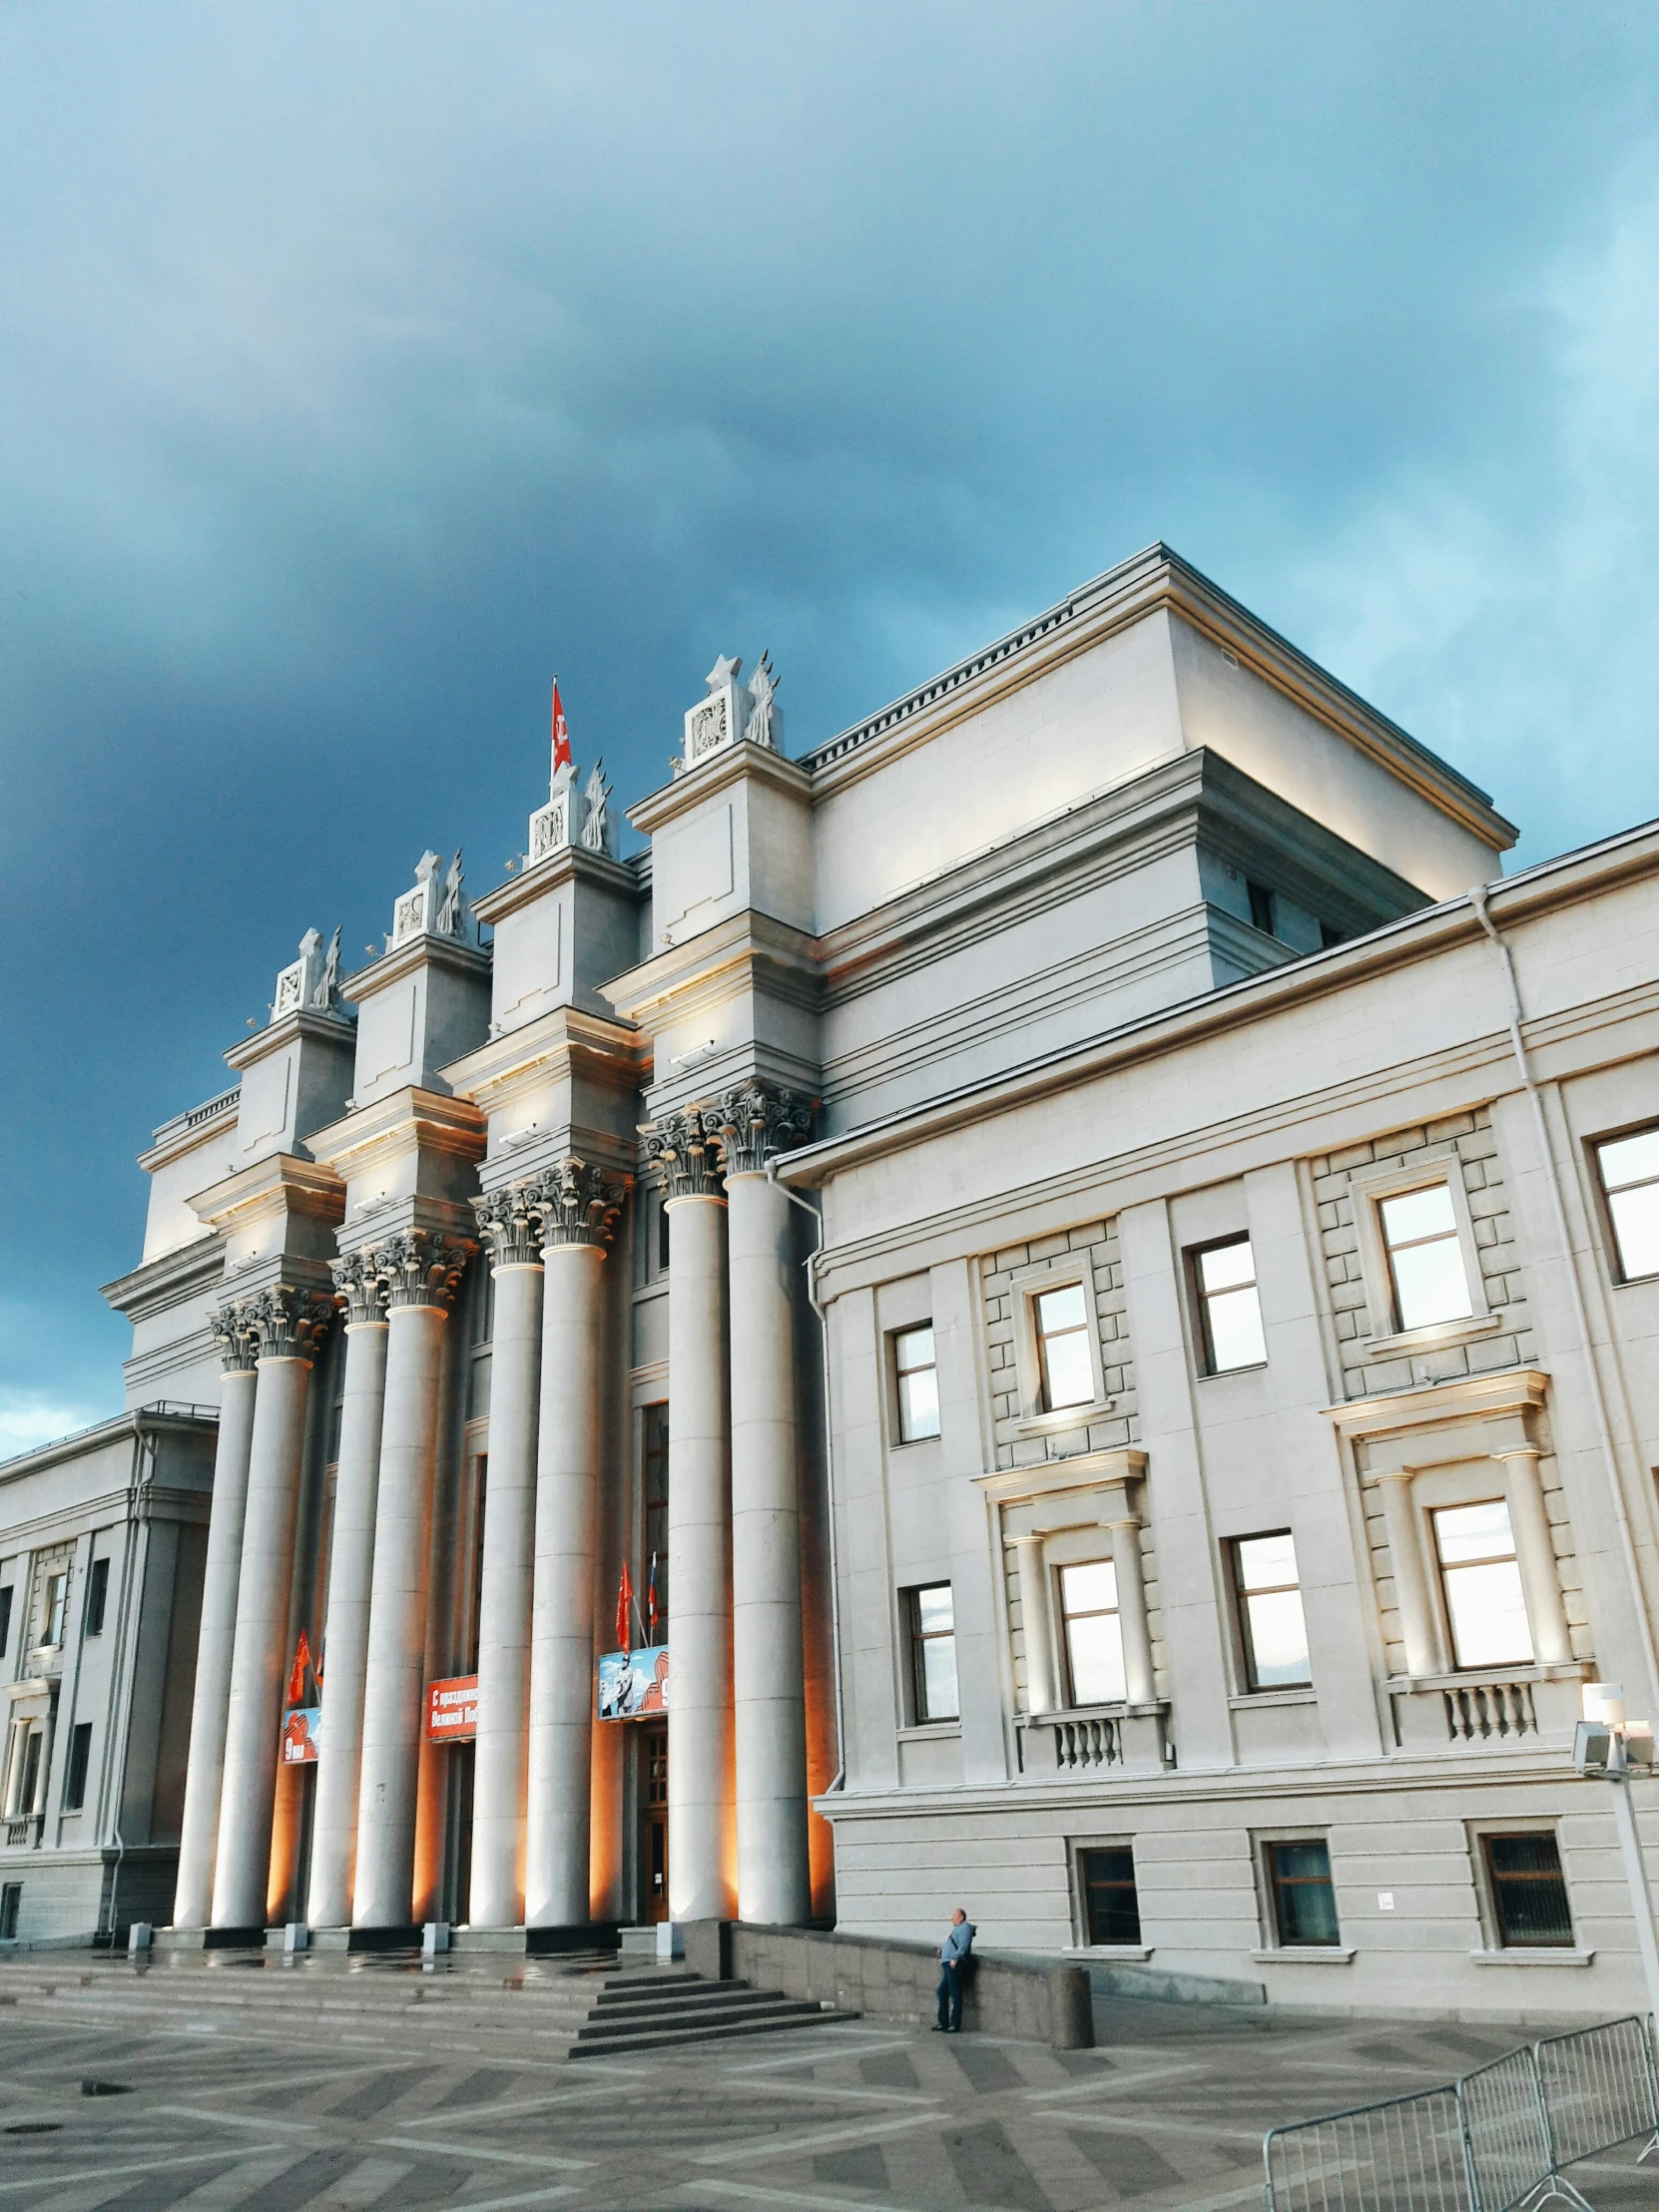 an ornate white building with many pillars stands in front of cloudy skies